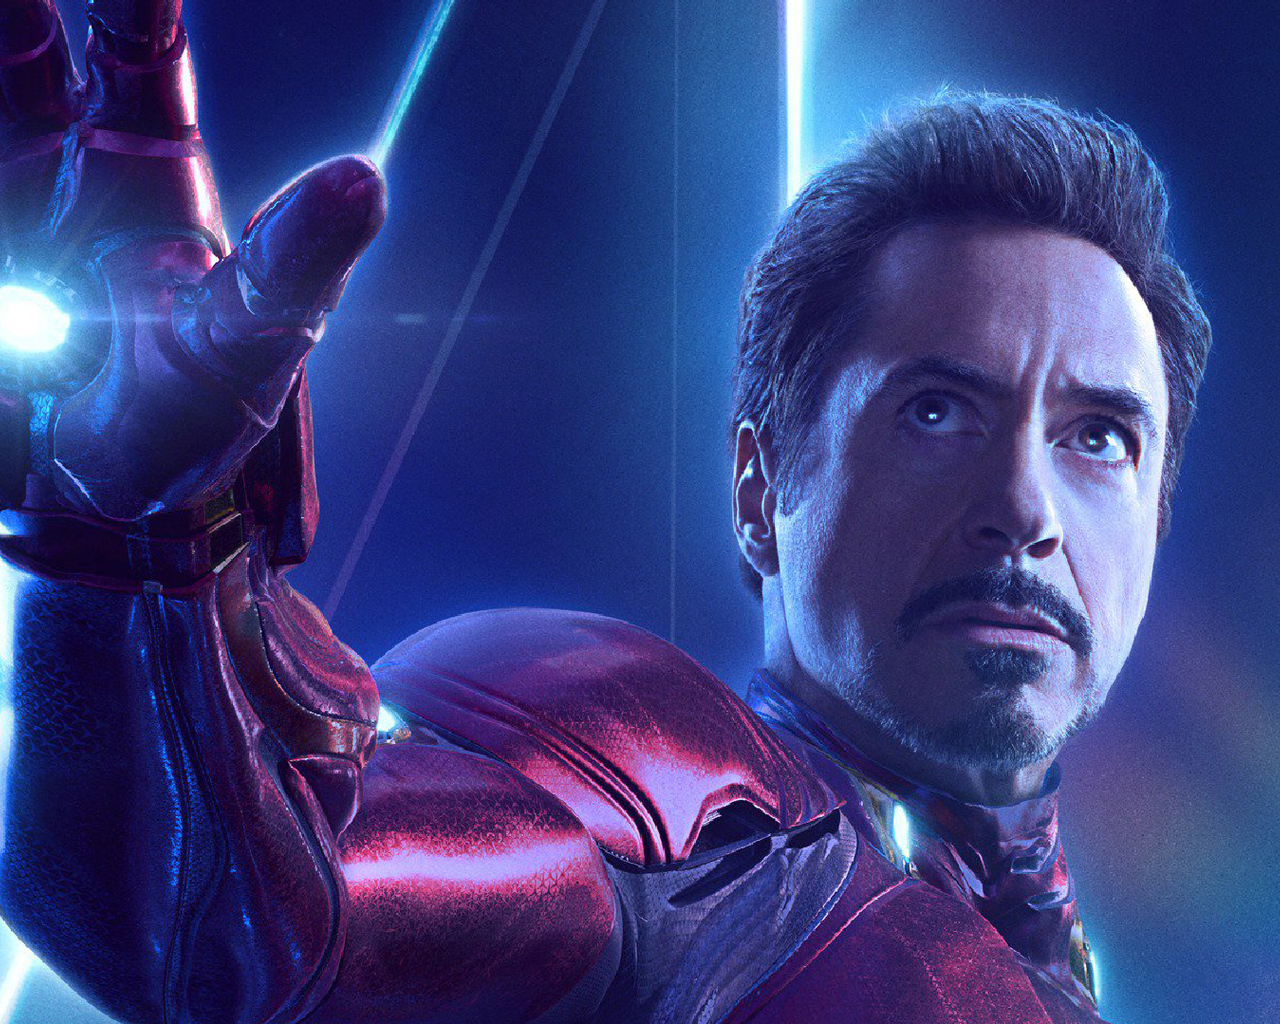 Iron Man In Avengers Infinity War New Poster 1280x1024 Resolution HD 4k Wallpaper, Image, Background, Photo and Picture